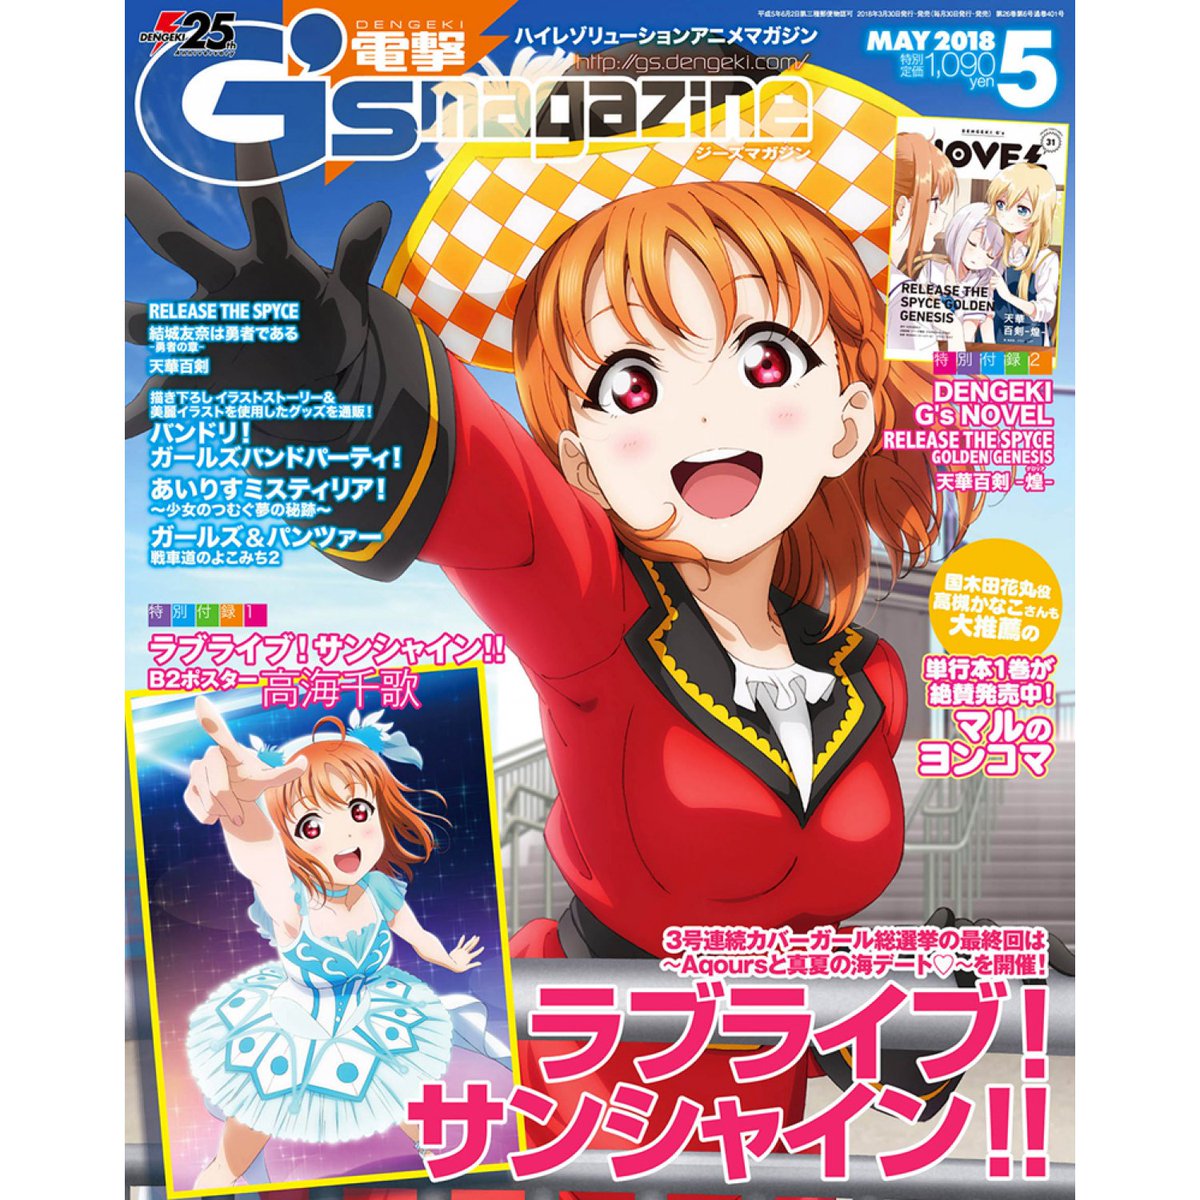 Playasia Are You A Bishojo Games And Anime Fan Well Don T Miss The New Issue Of Dengeki G S Magazine T Co Y0z0sk53el Dengekigsmagazine May Bishoujo T Co J2poae3z0c